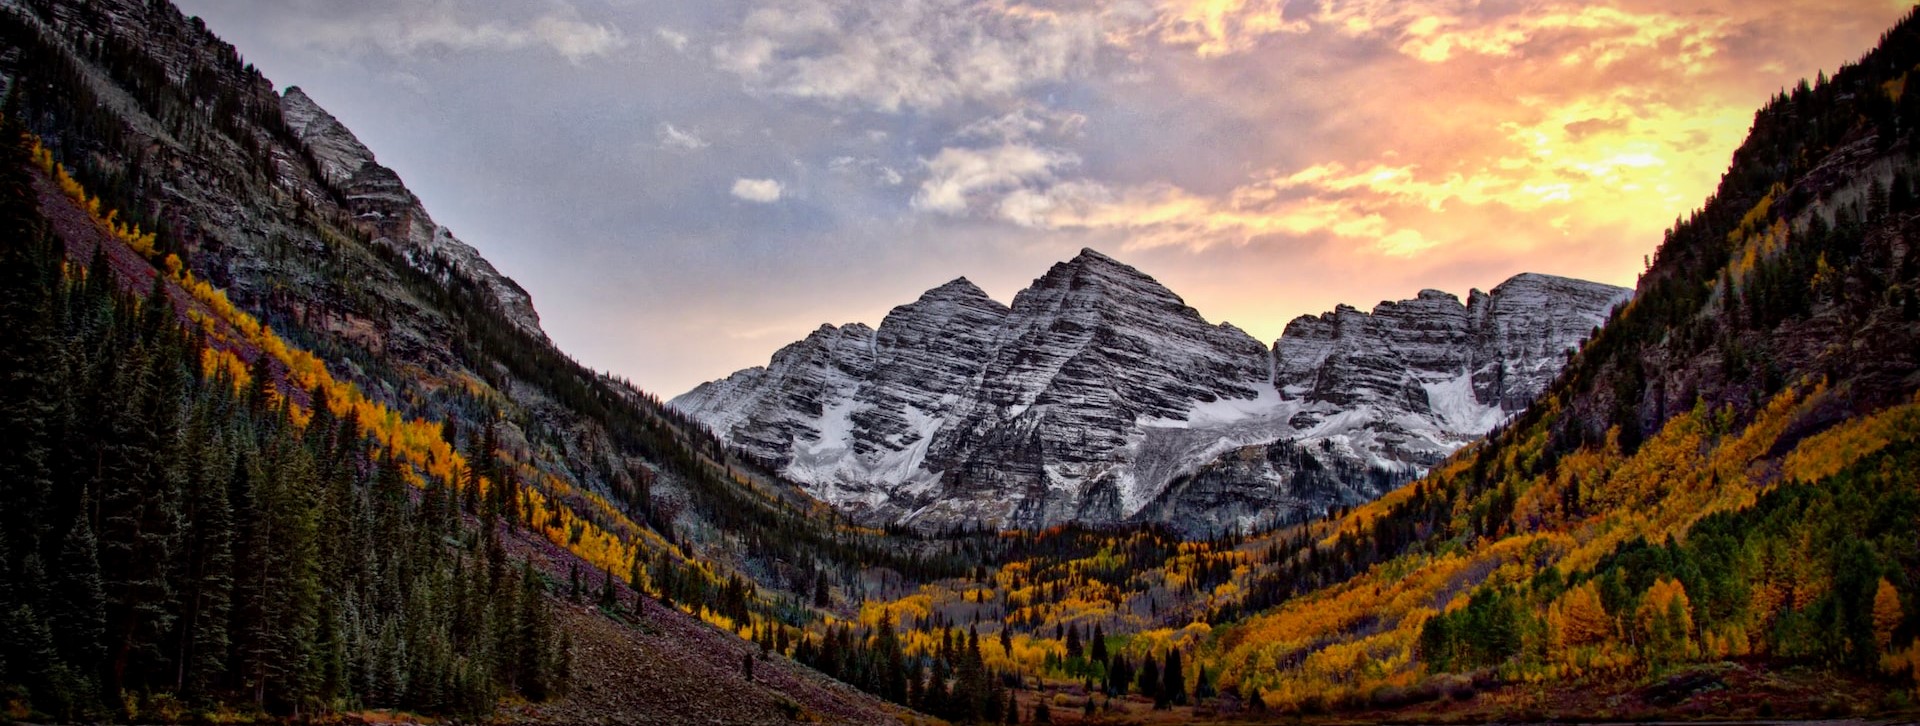 Maroon Bells Sunset | Breast Cancer Car Donations